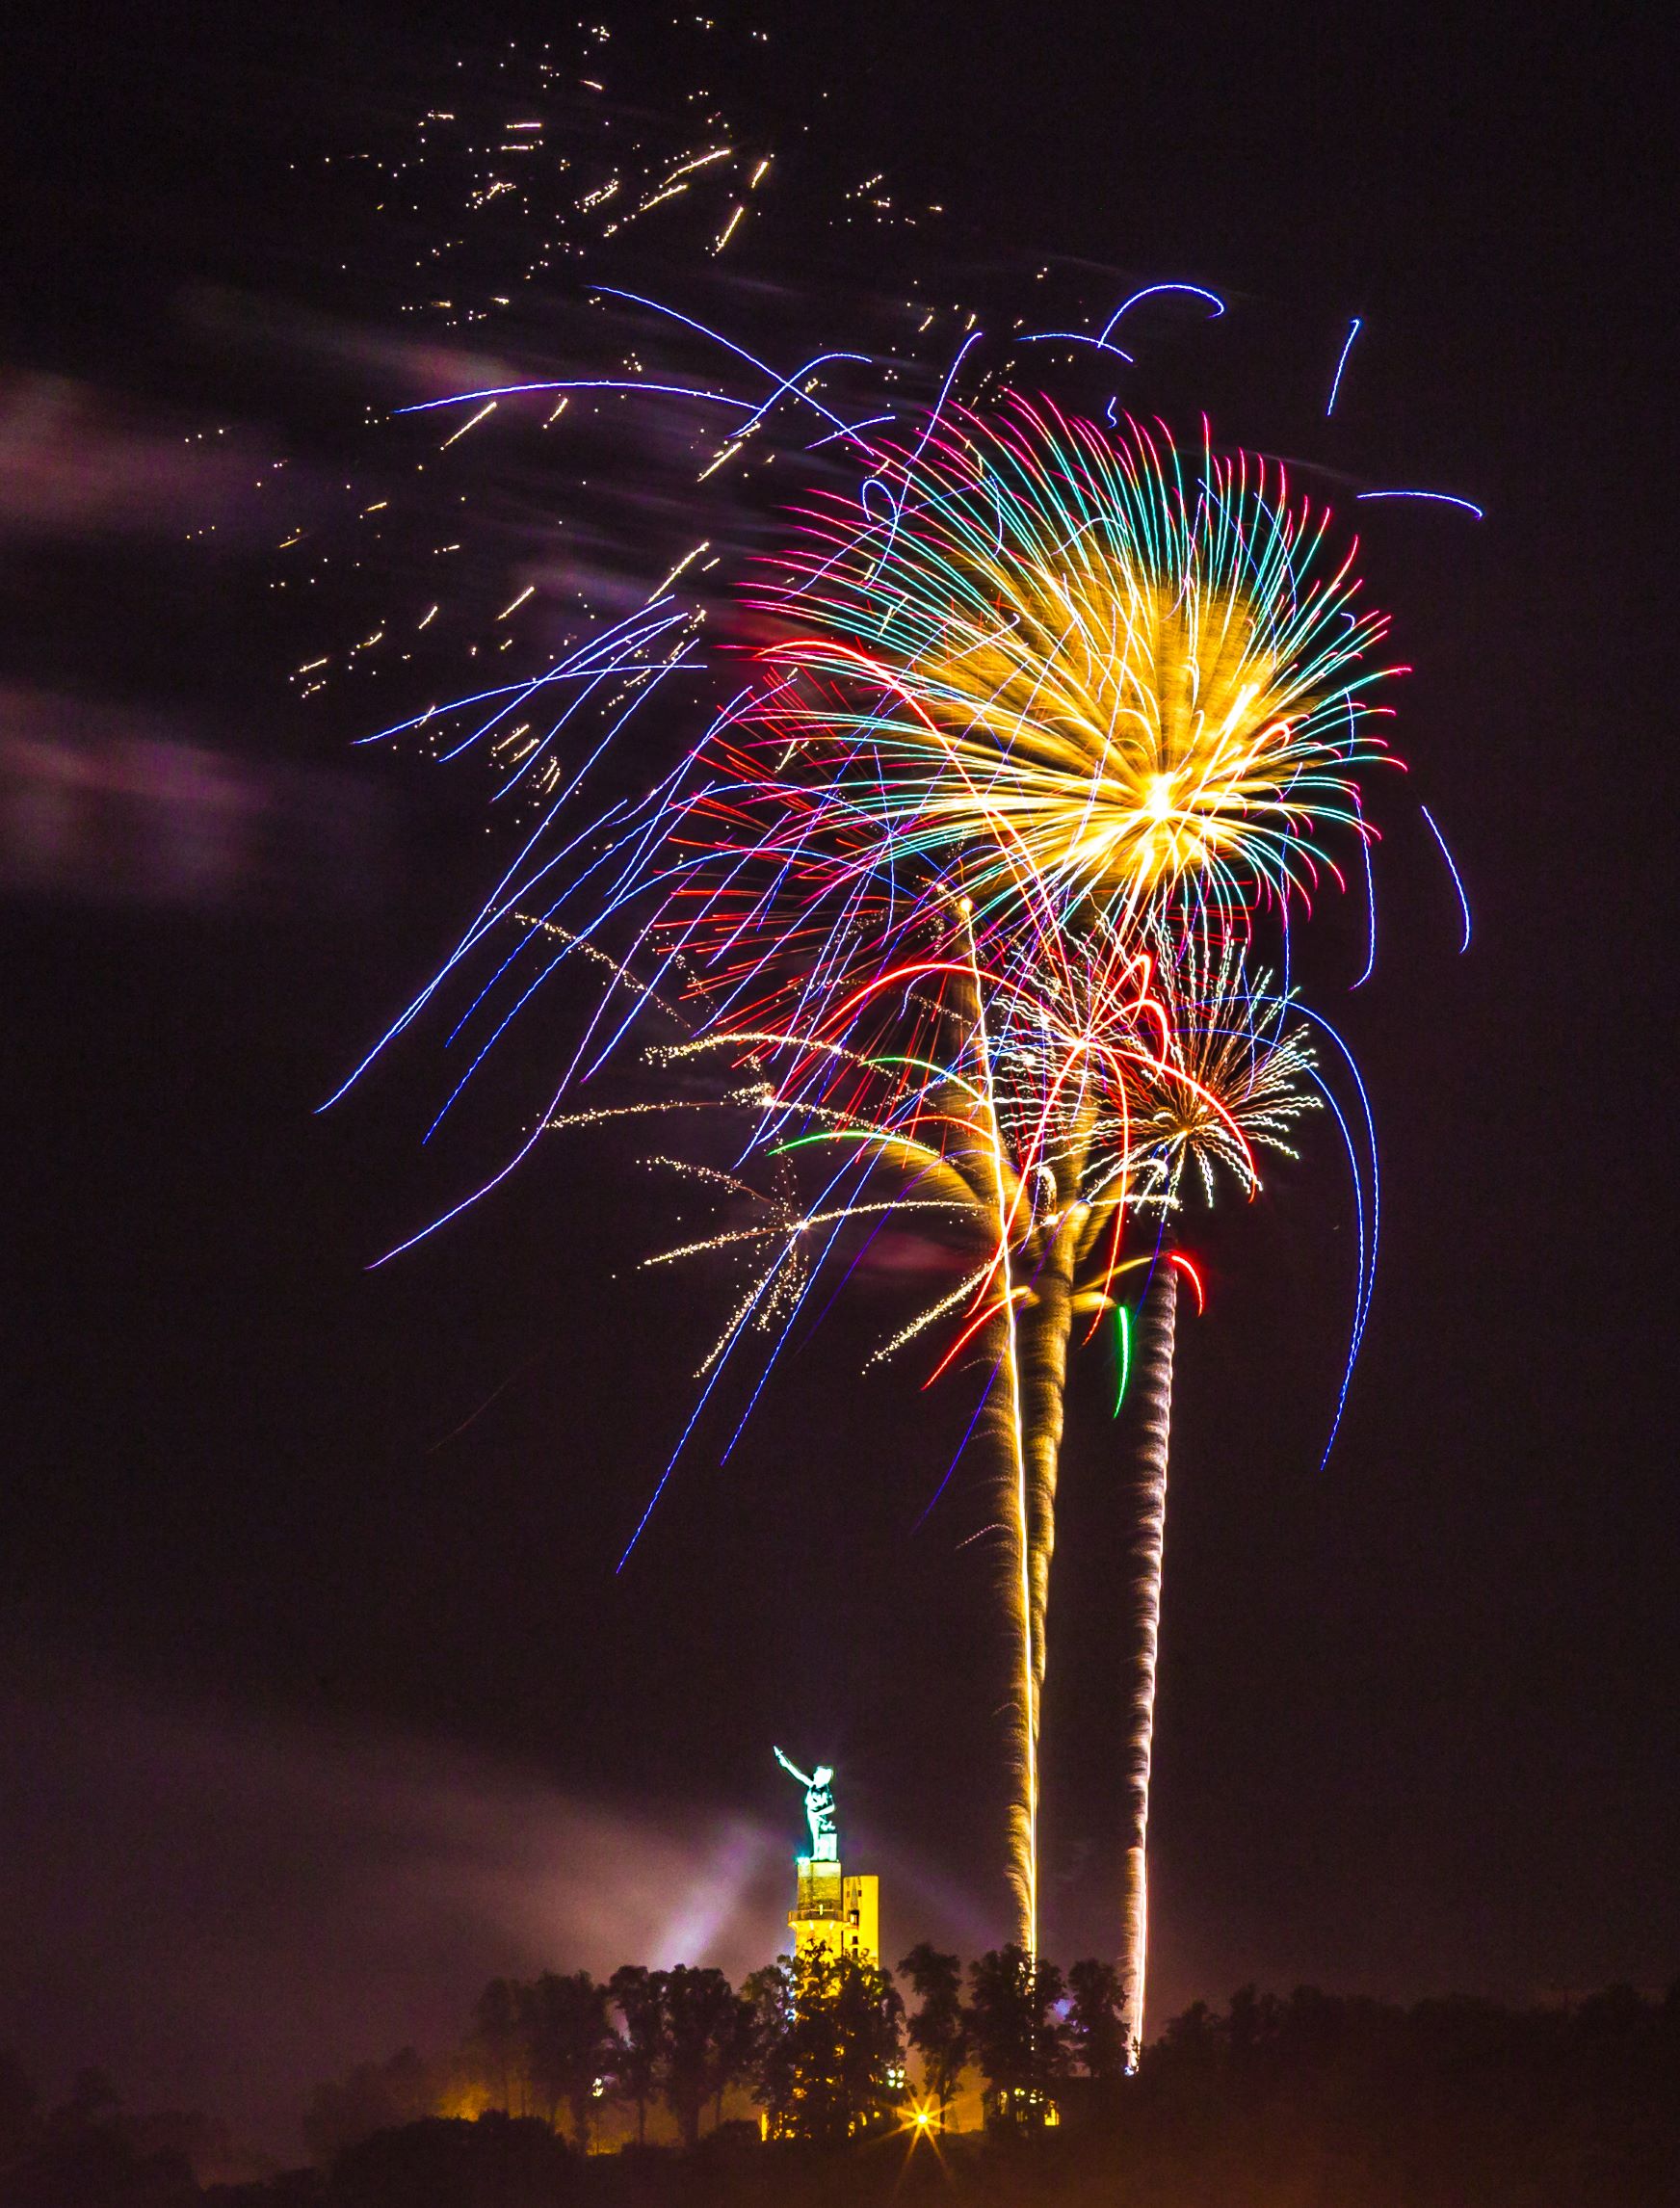 Pink, green, yellow, and blue fireworks over the statue of Vulcan with trees in the foreground